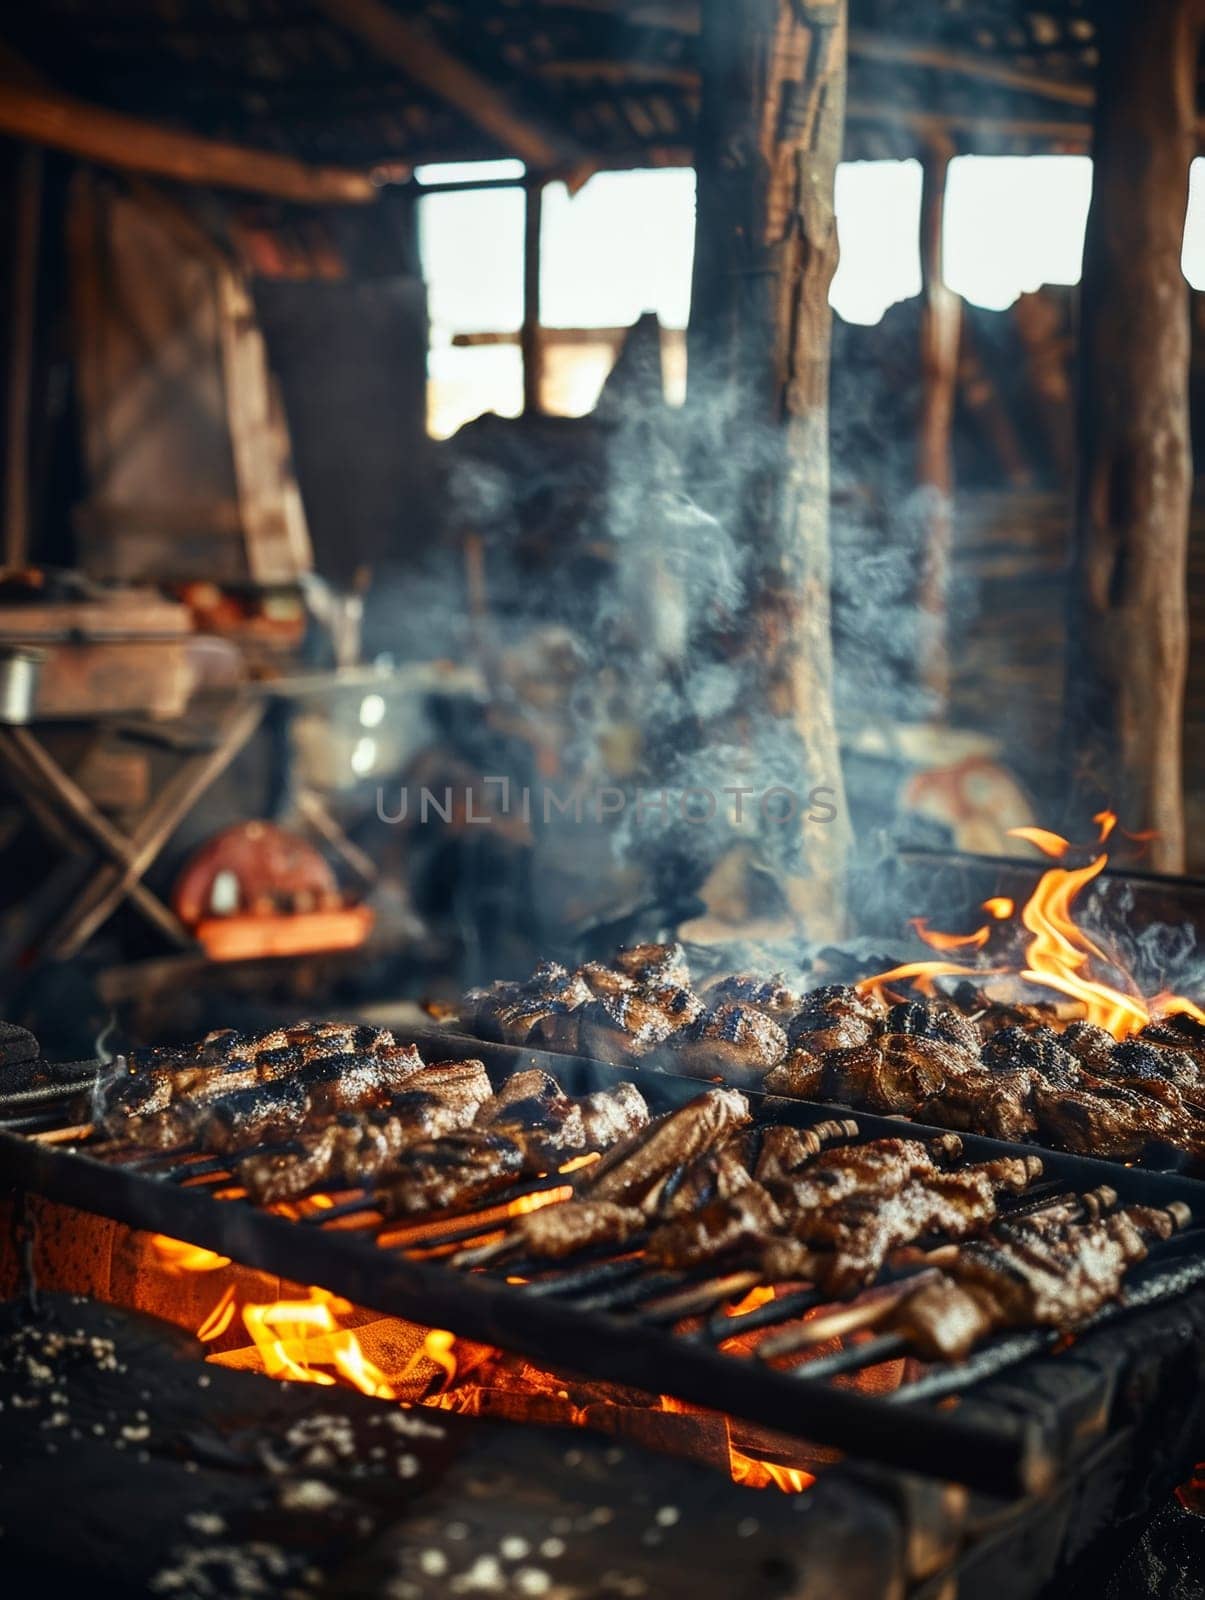 Kapana, a traditional Namibian dish of grilled, spiced meat typically sold in open-air markets. This flavorful and smoky street food represents the vibrant culinary culture of Africa. by sfinks